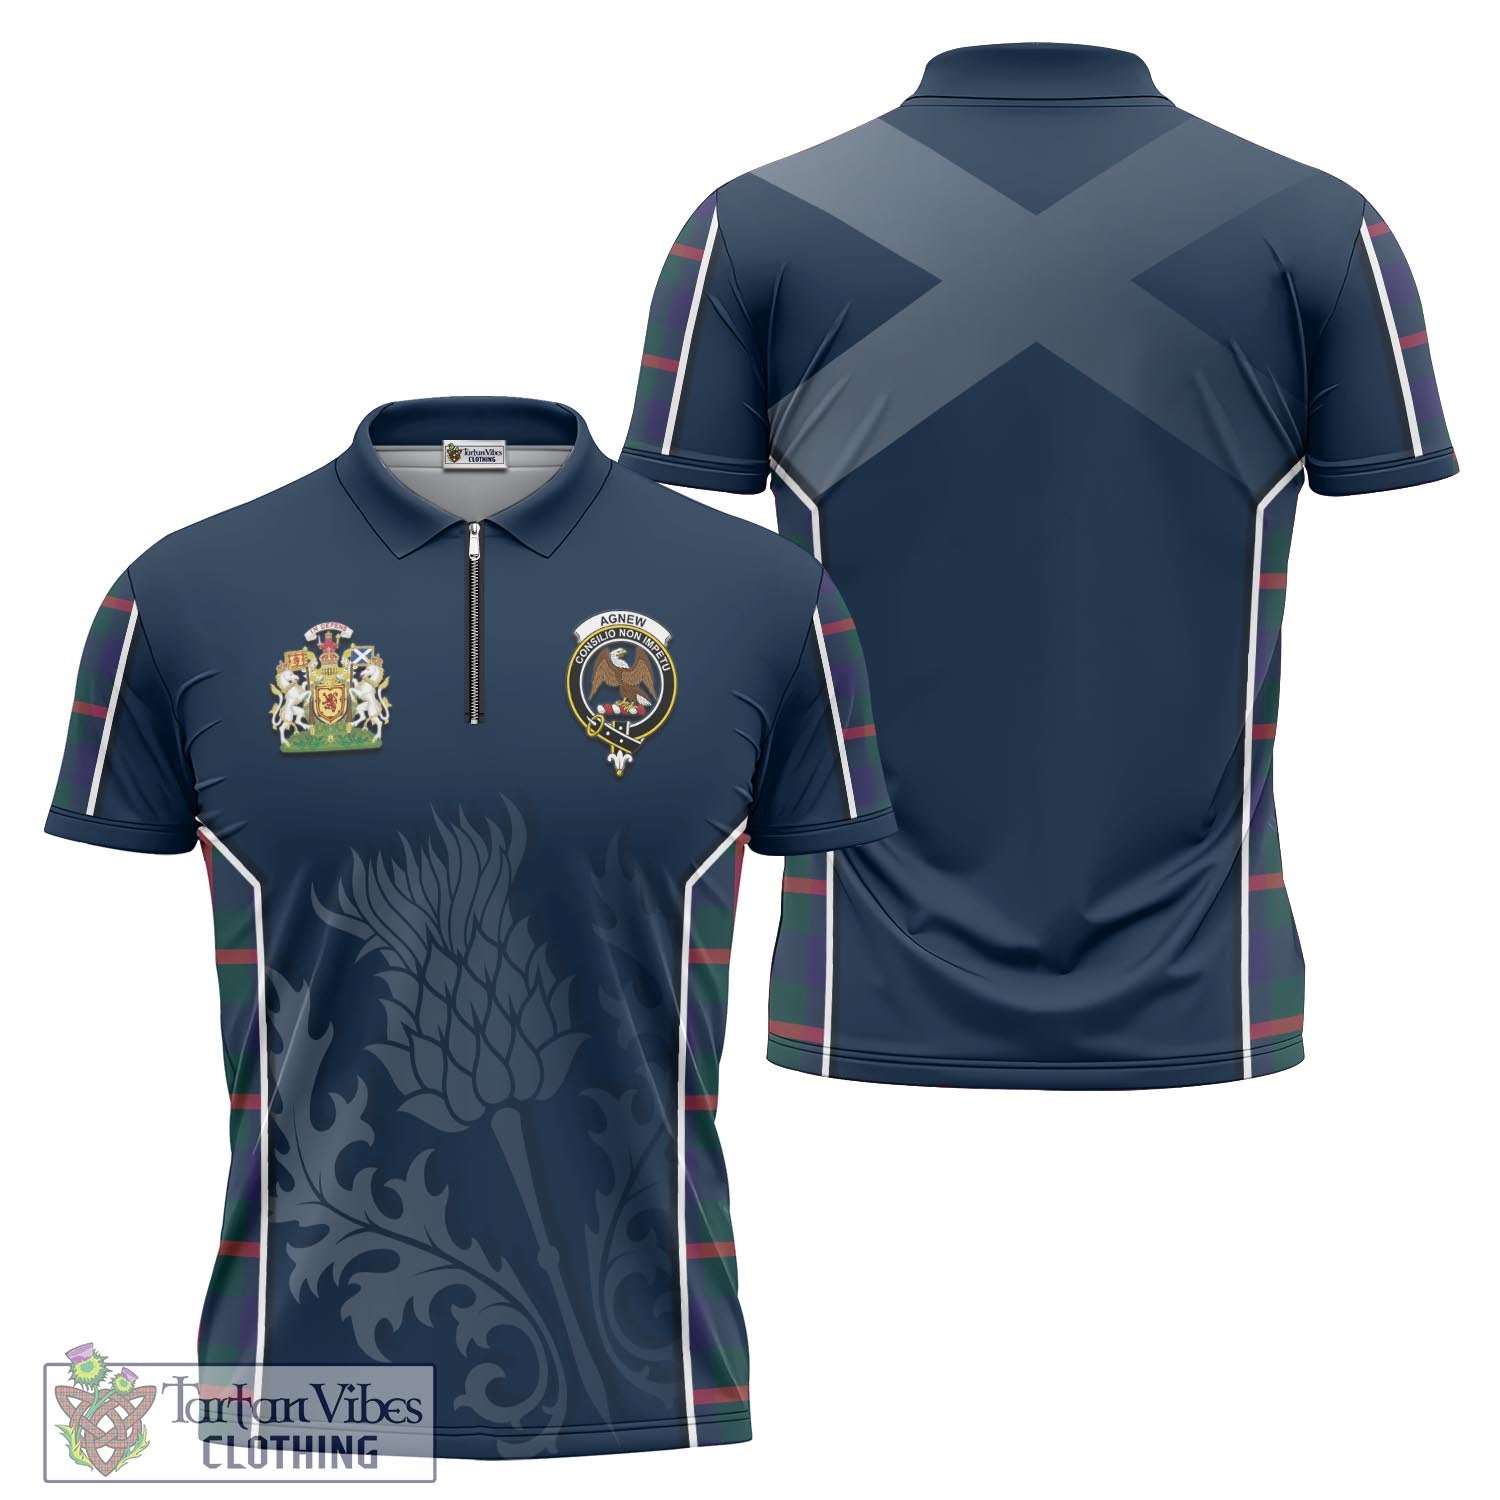 Tartan Vibes Clothing Agnew Modern Tartan Zipper Polo Shirt with Family Crest and Scottish Thistle Vibes Sport Style